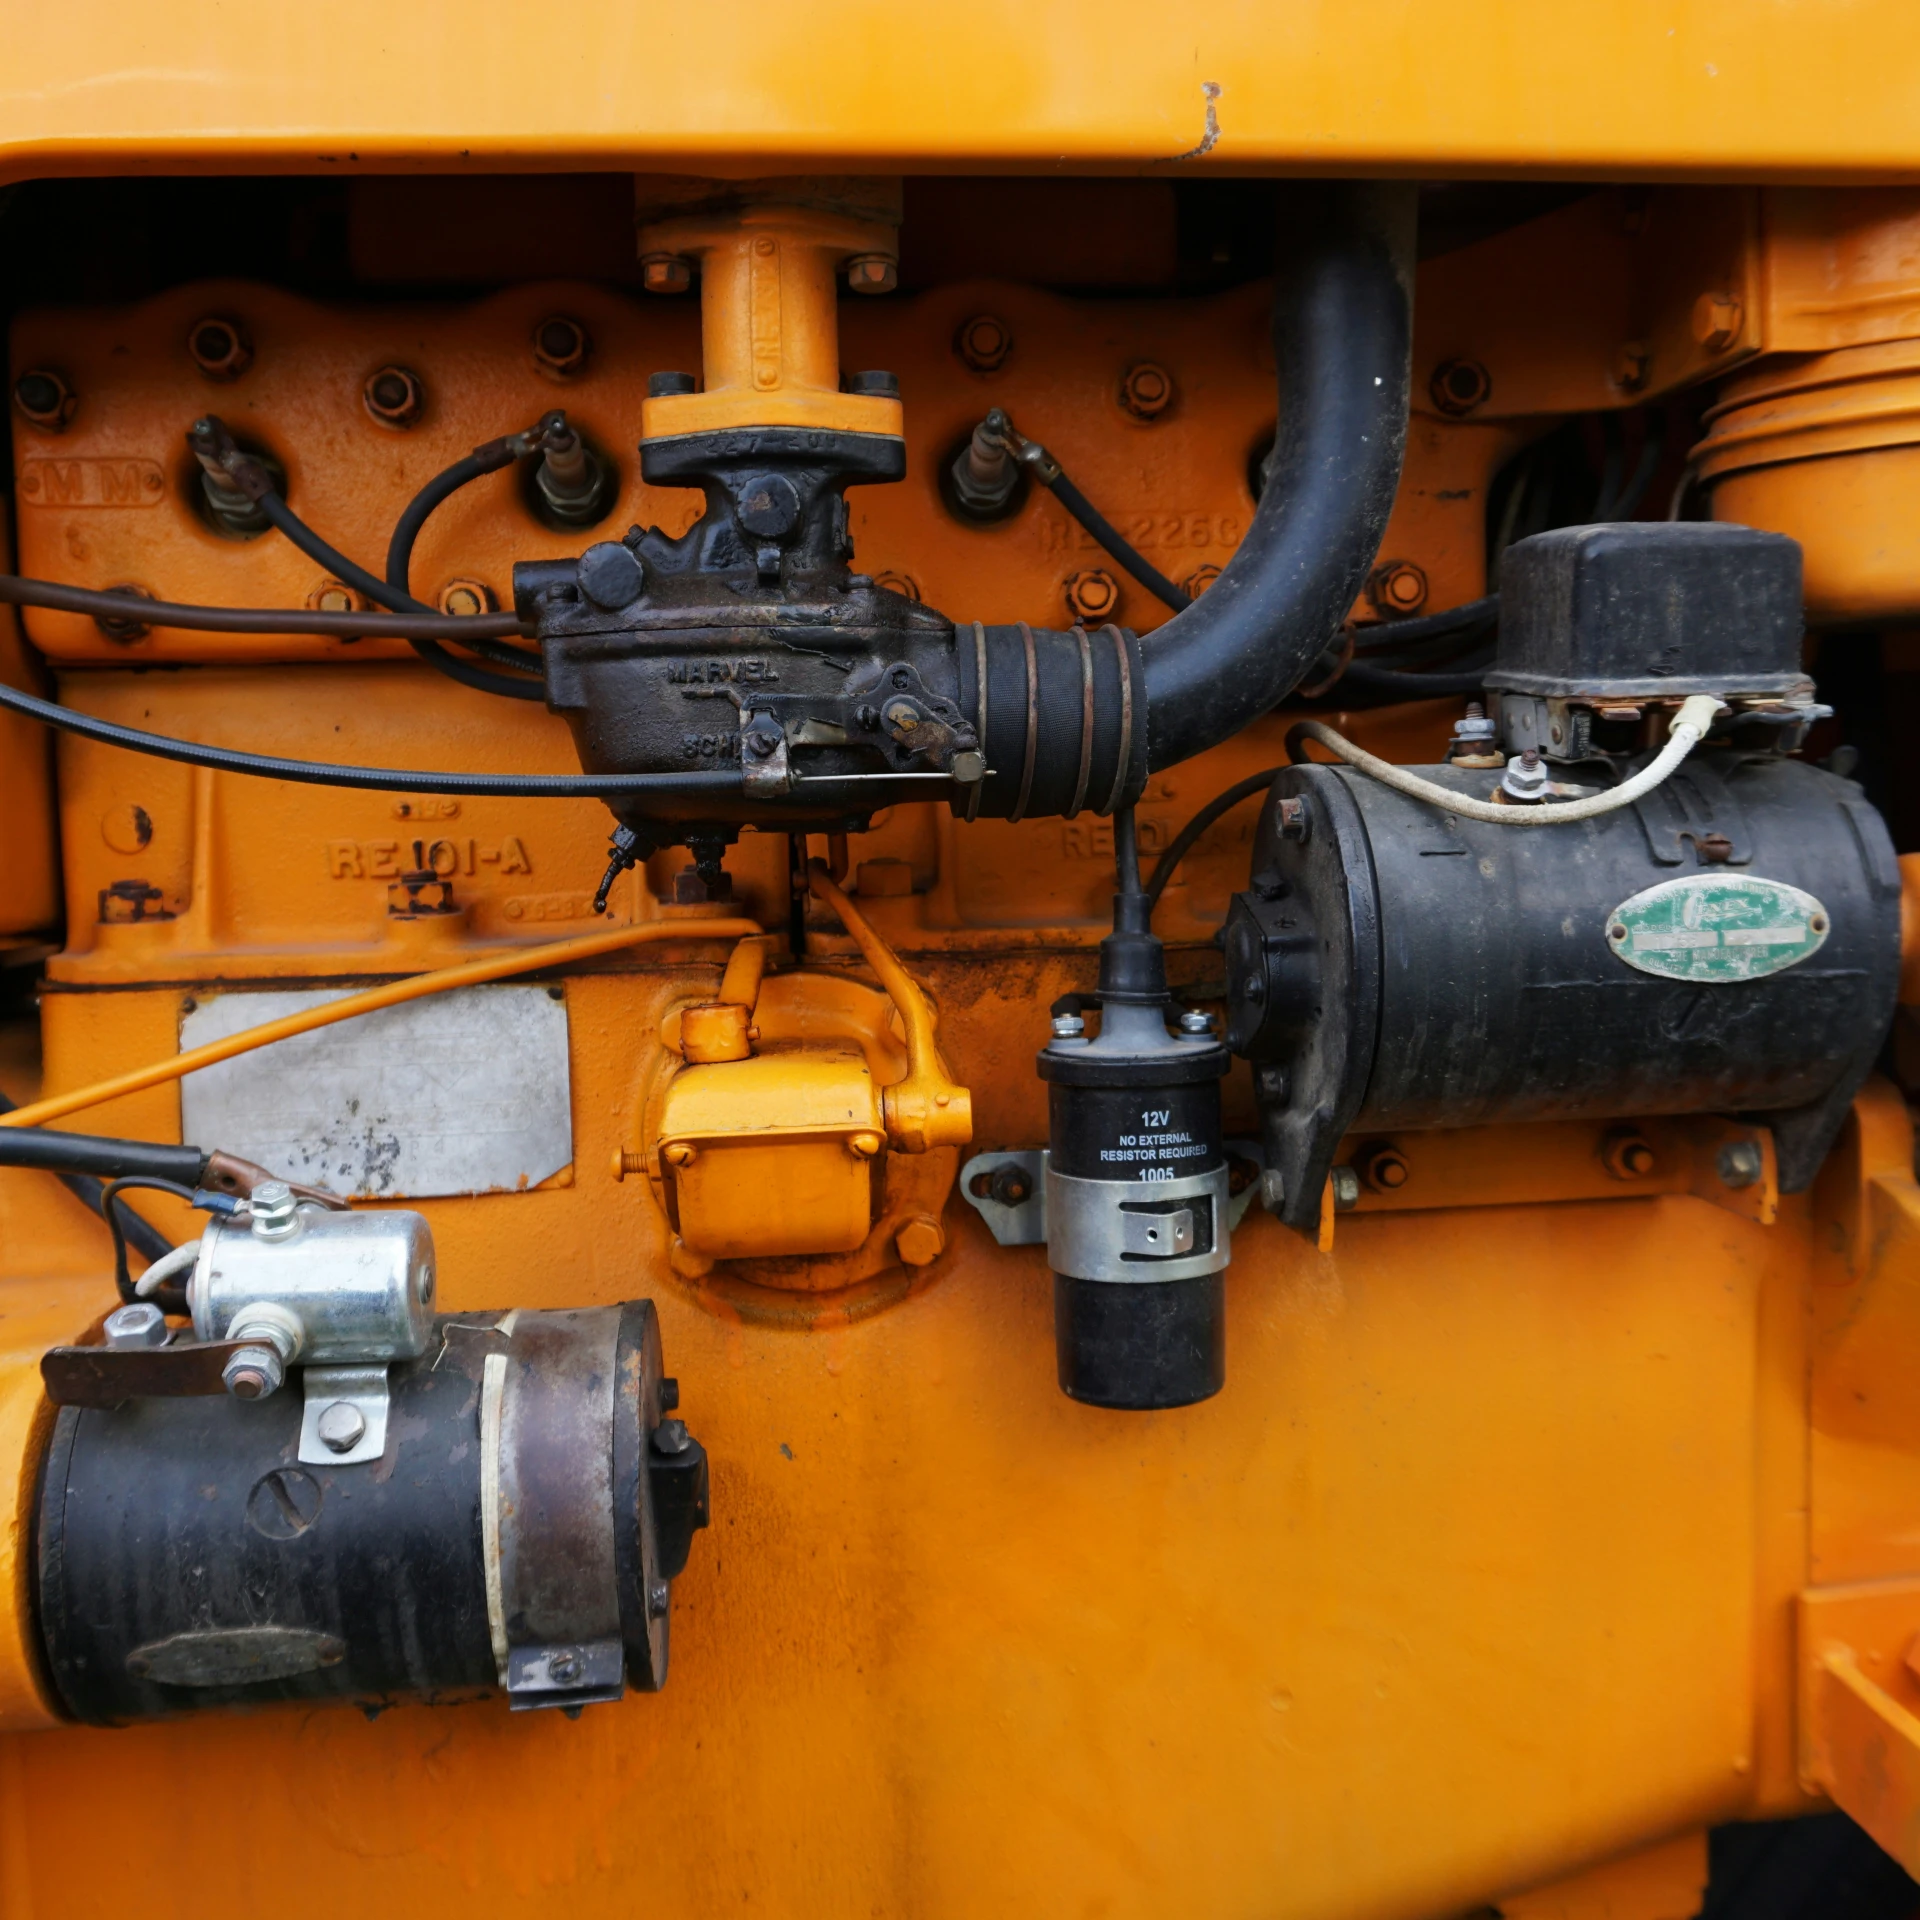 a close up view of a large yellow machine